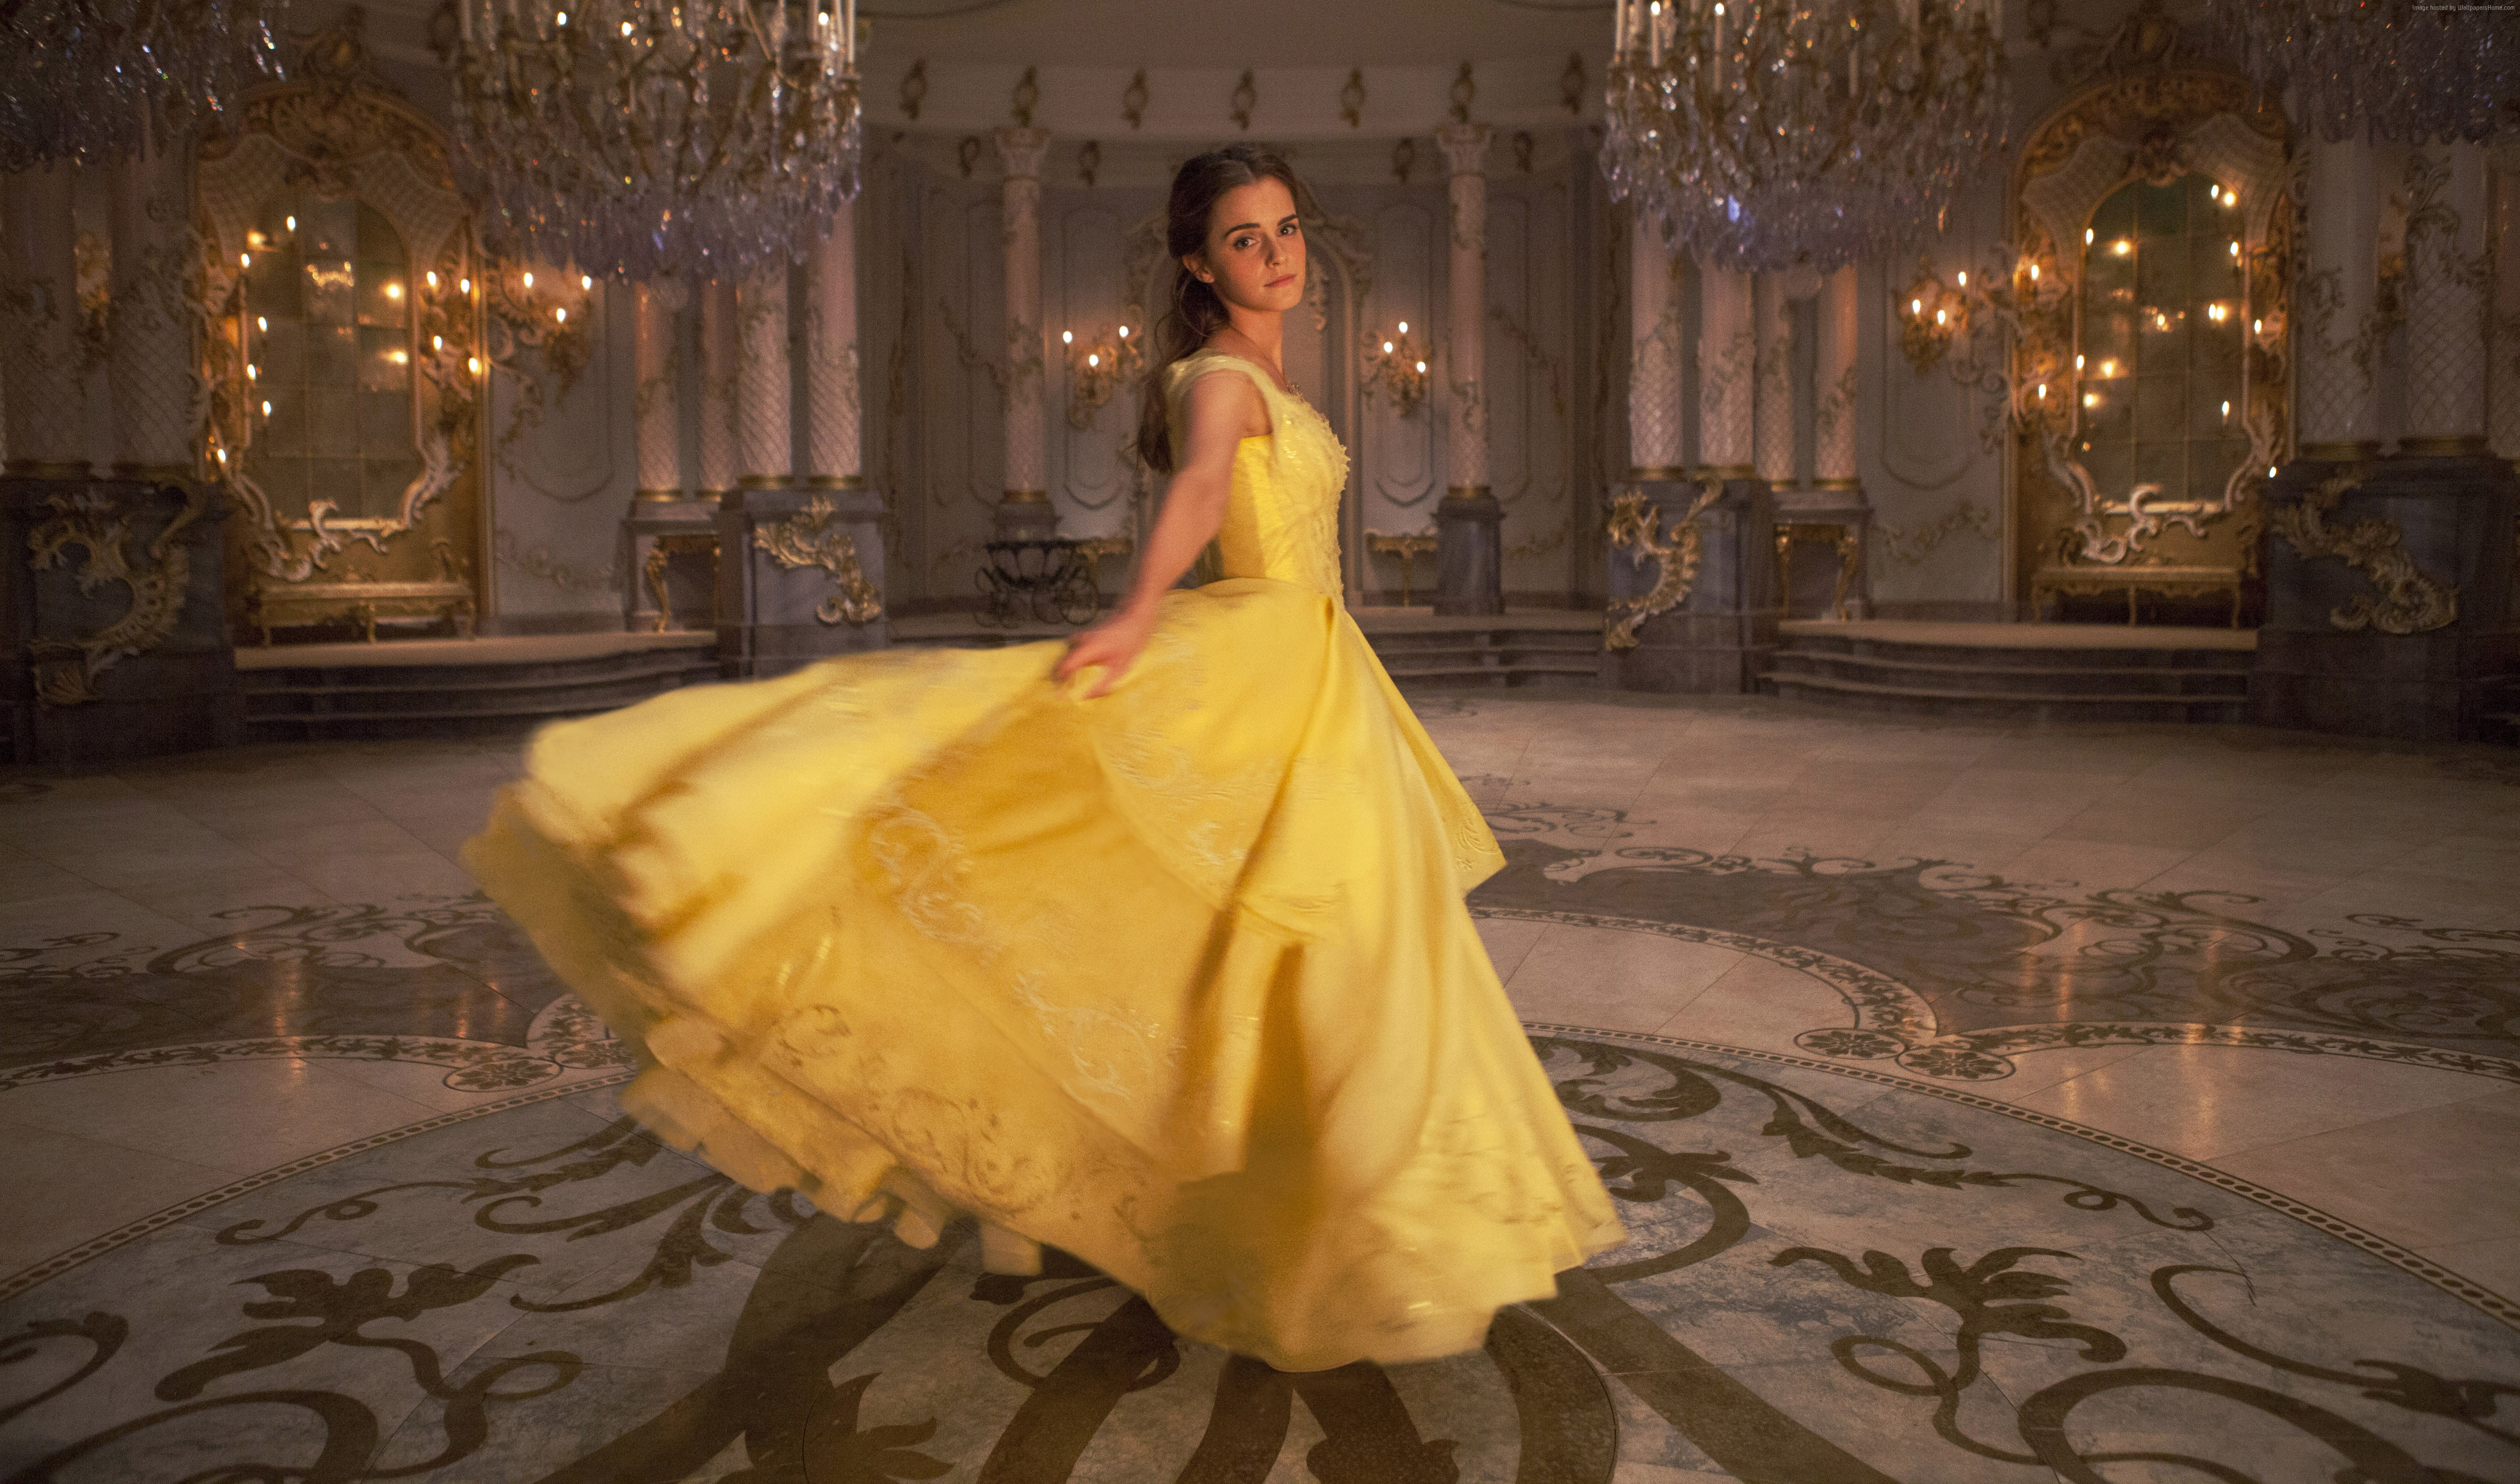 Beauty and the Beast, best movies, Emma Watson, one person